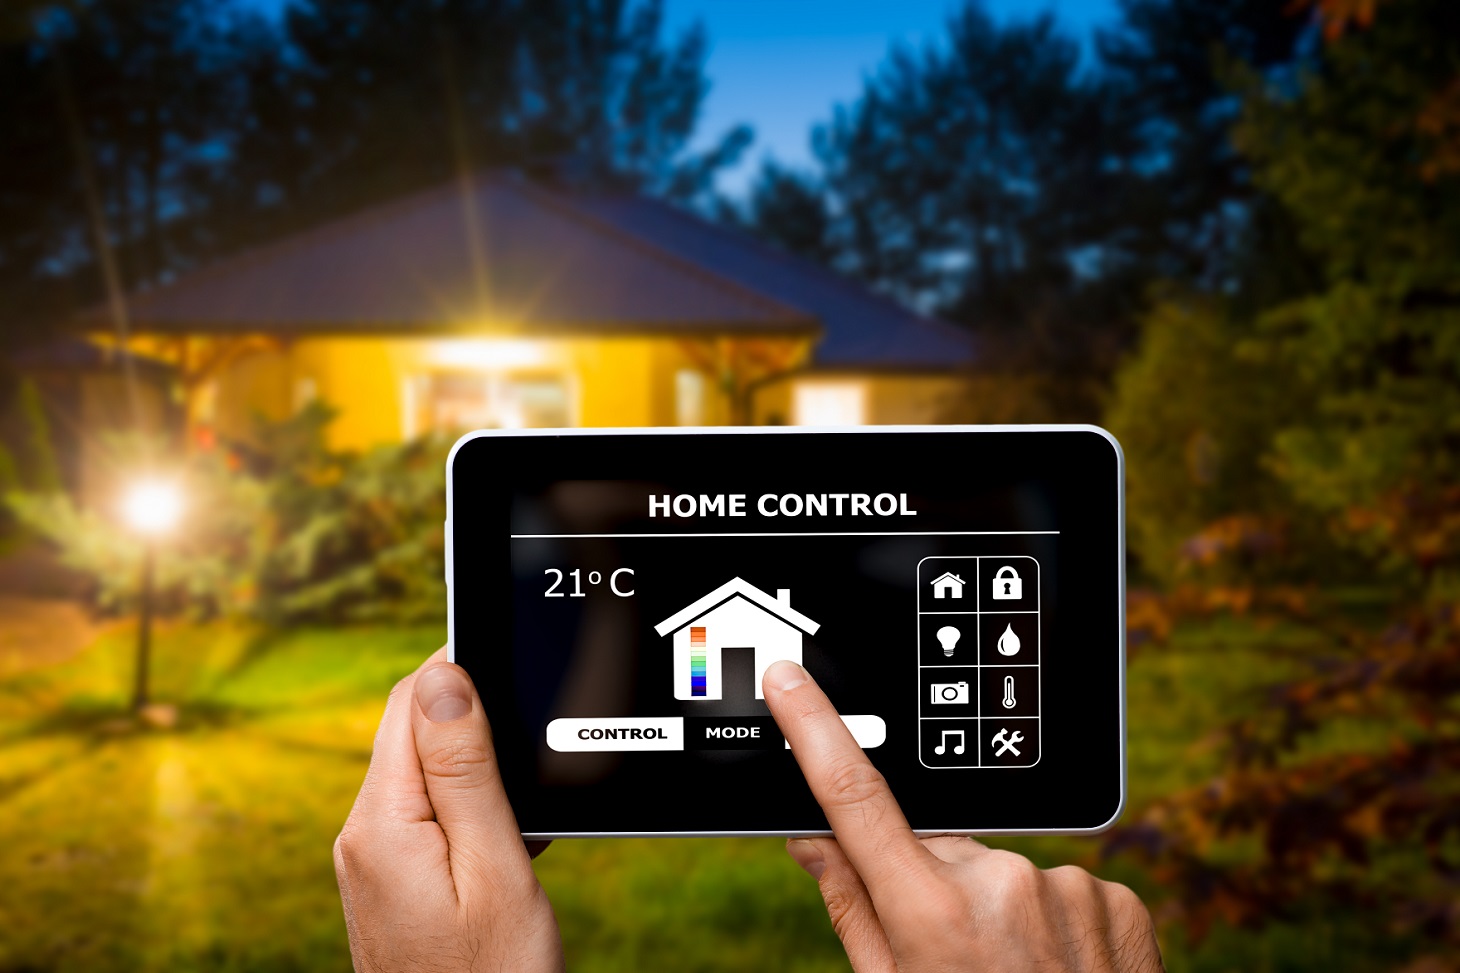 What Is The Difference Between Automation And Remote Control?